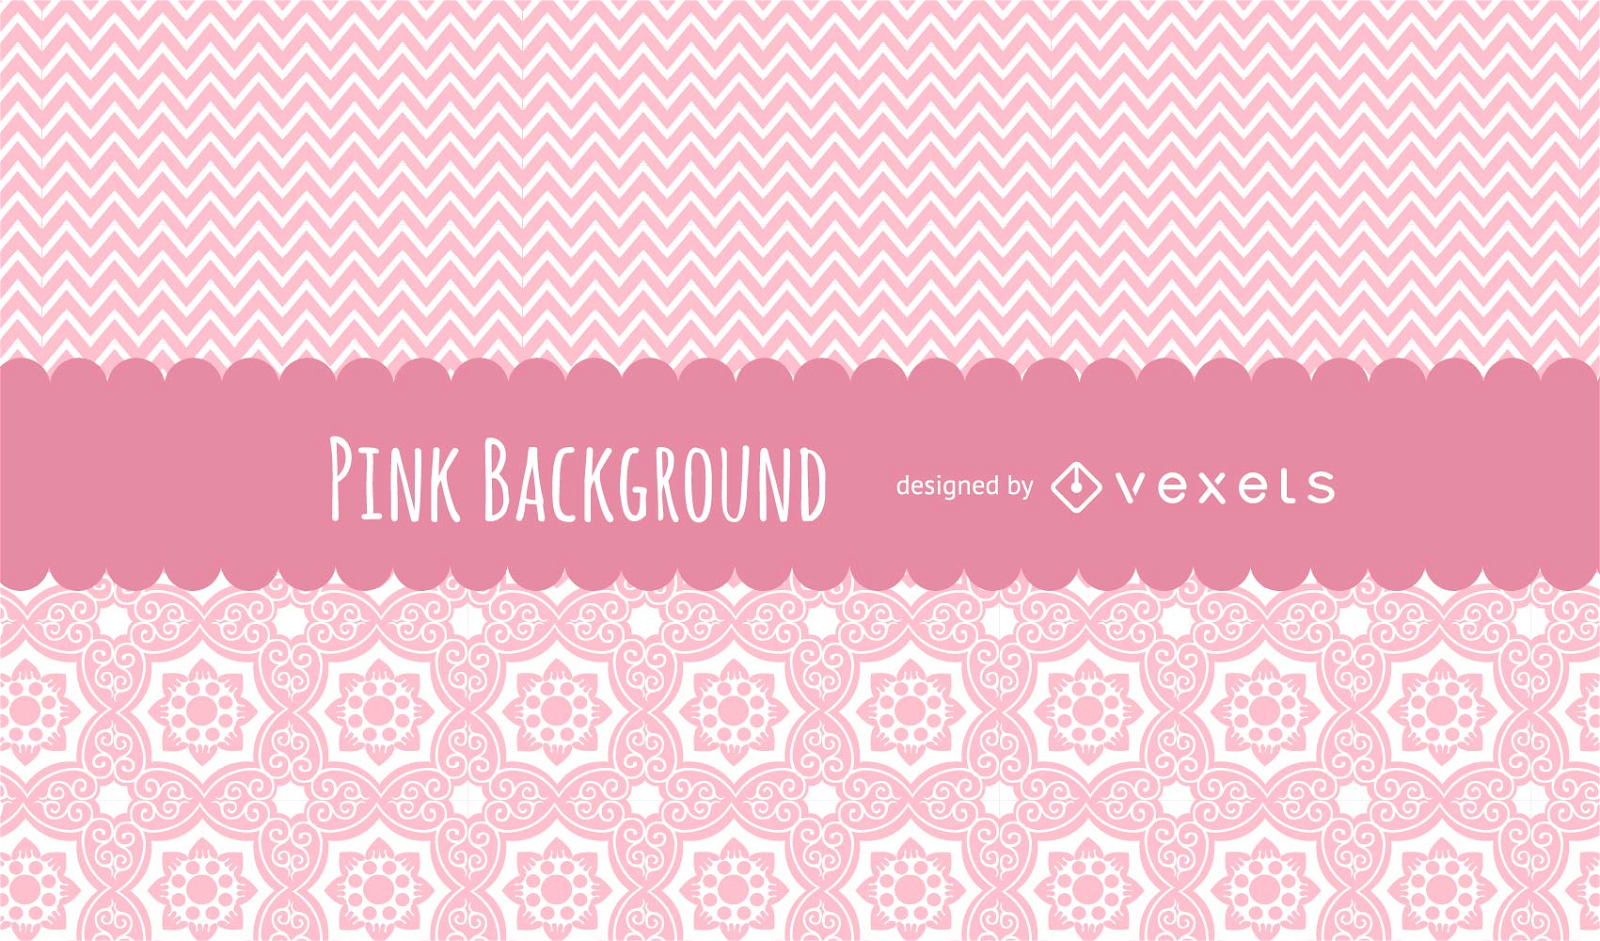 Cute pink patterns background